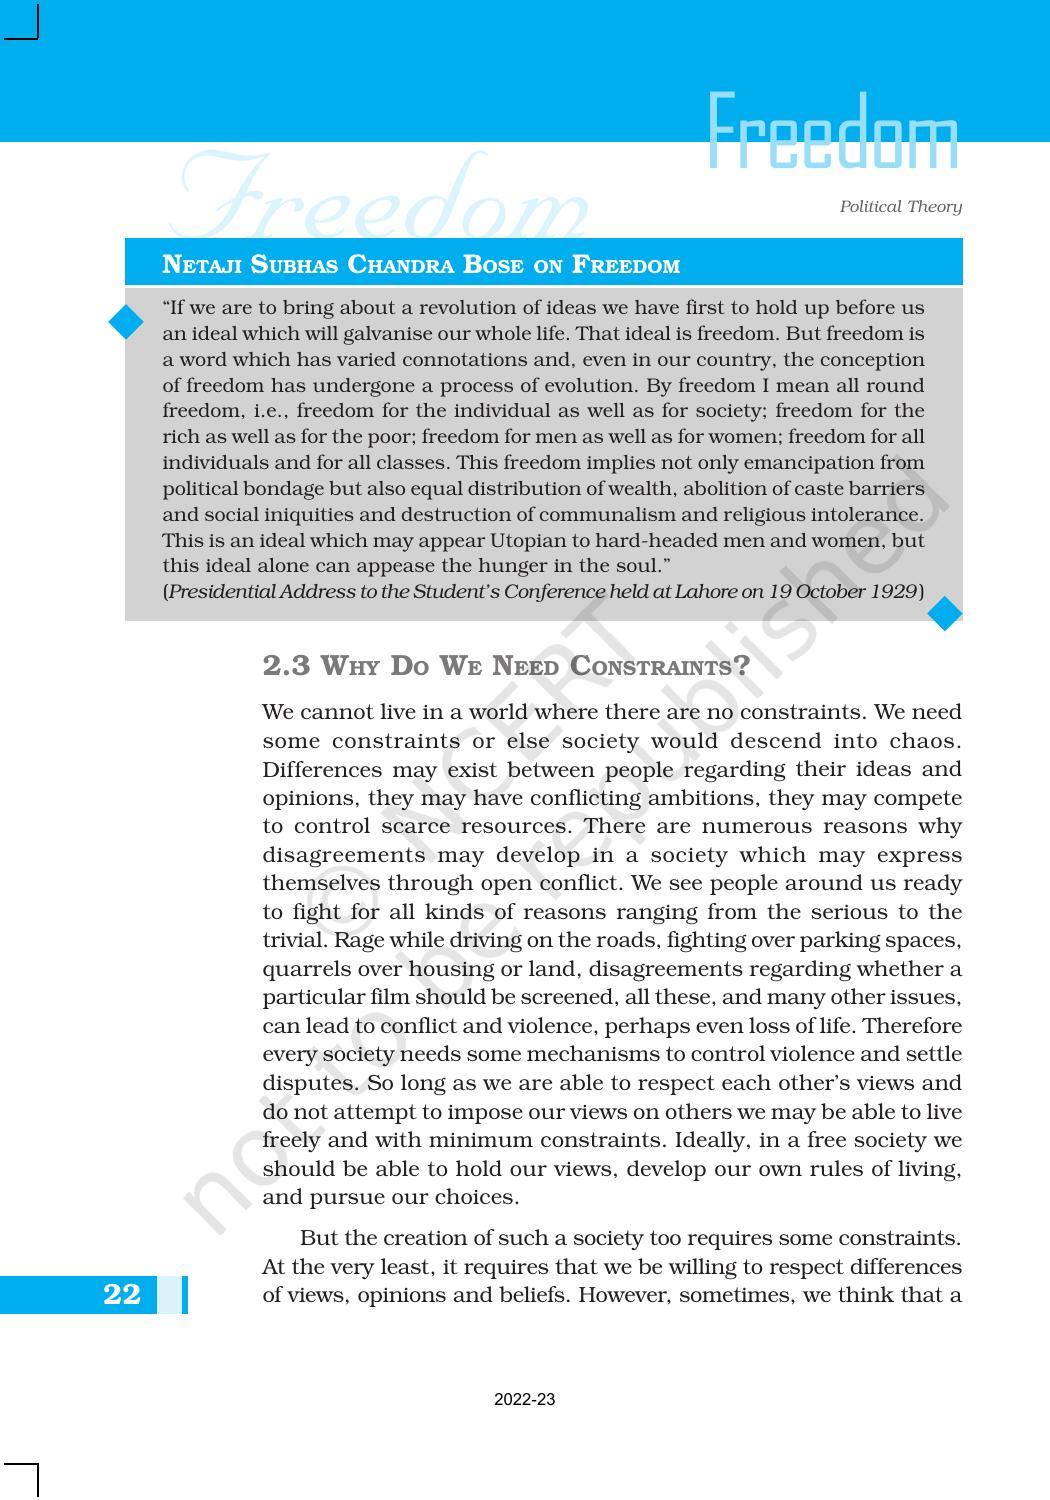 NCERT Book for Class 11 Political Science (Political Theory) Chapter 2 Freedom - Page 6